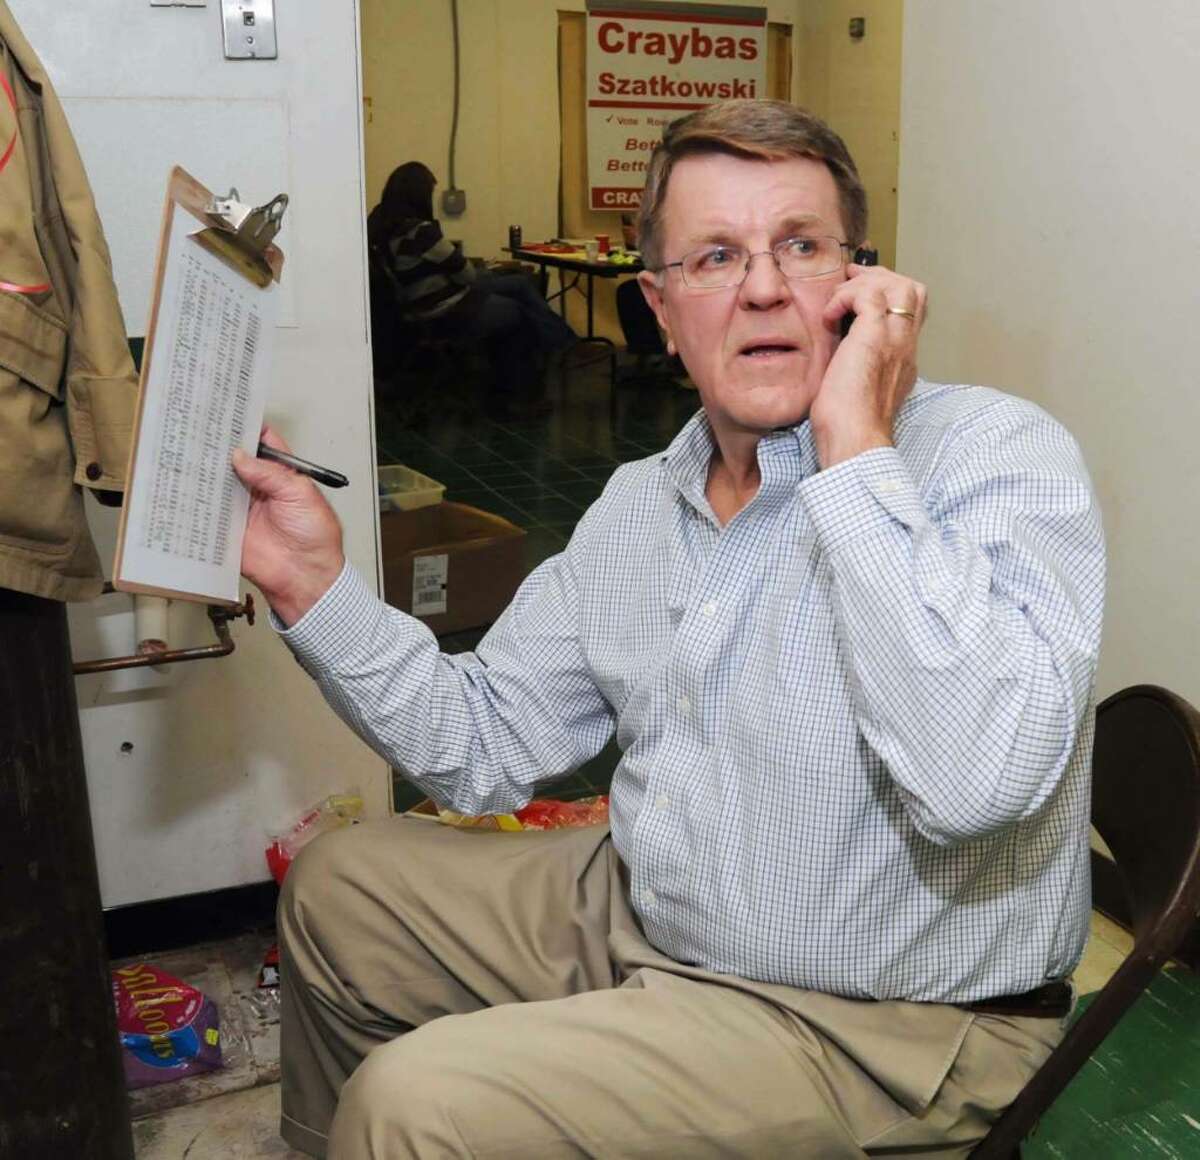 Bethel's Republican candidate for First Selectman, Larry Craybas, continues to make calls at the Republican Headquarters on election night, Tuesday, Nov. 3, 2009. 